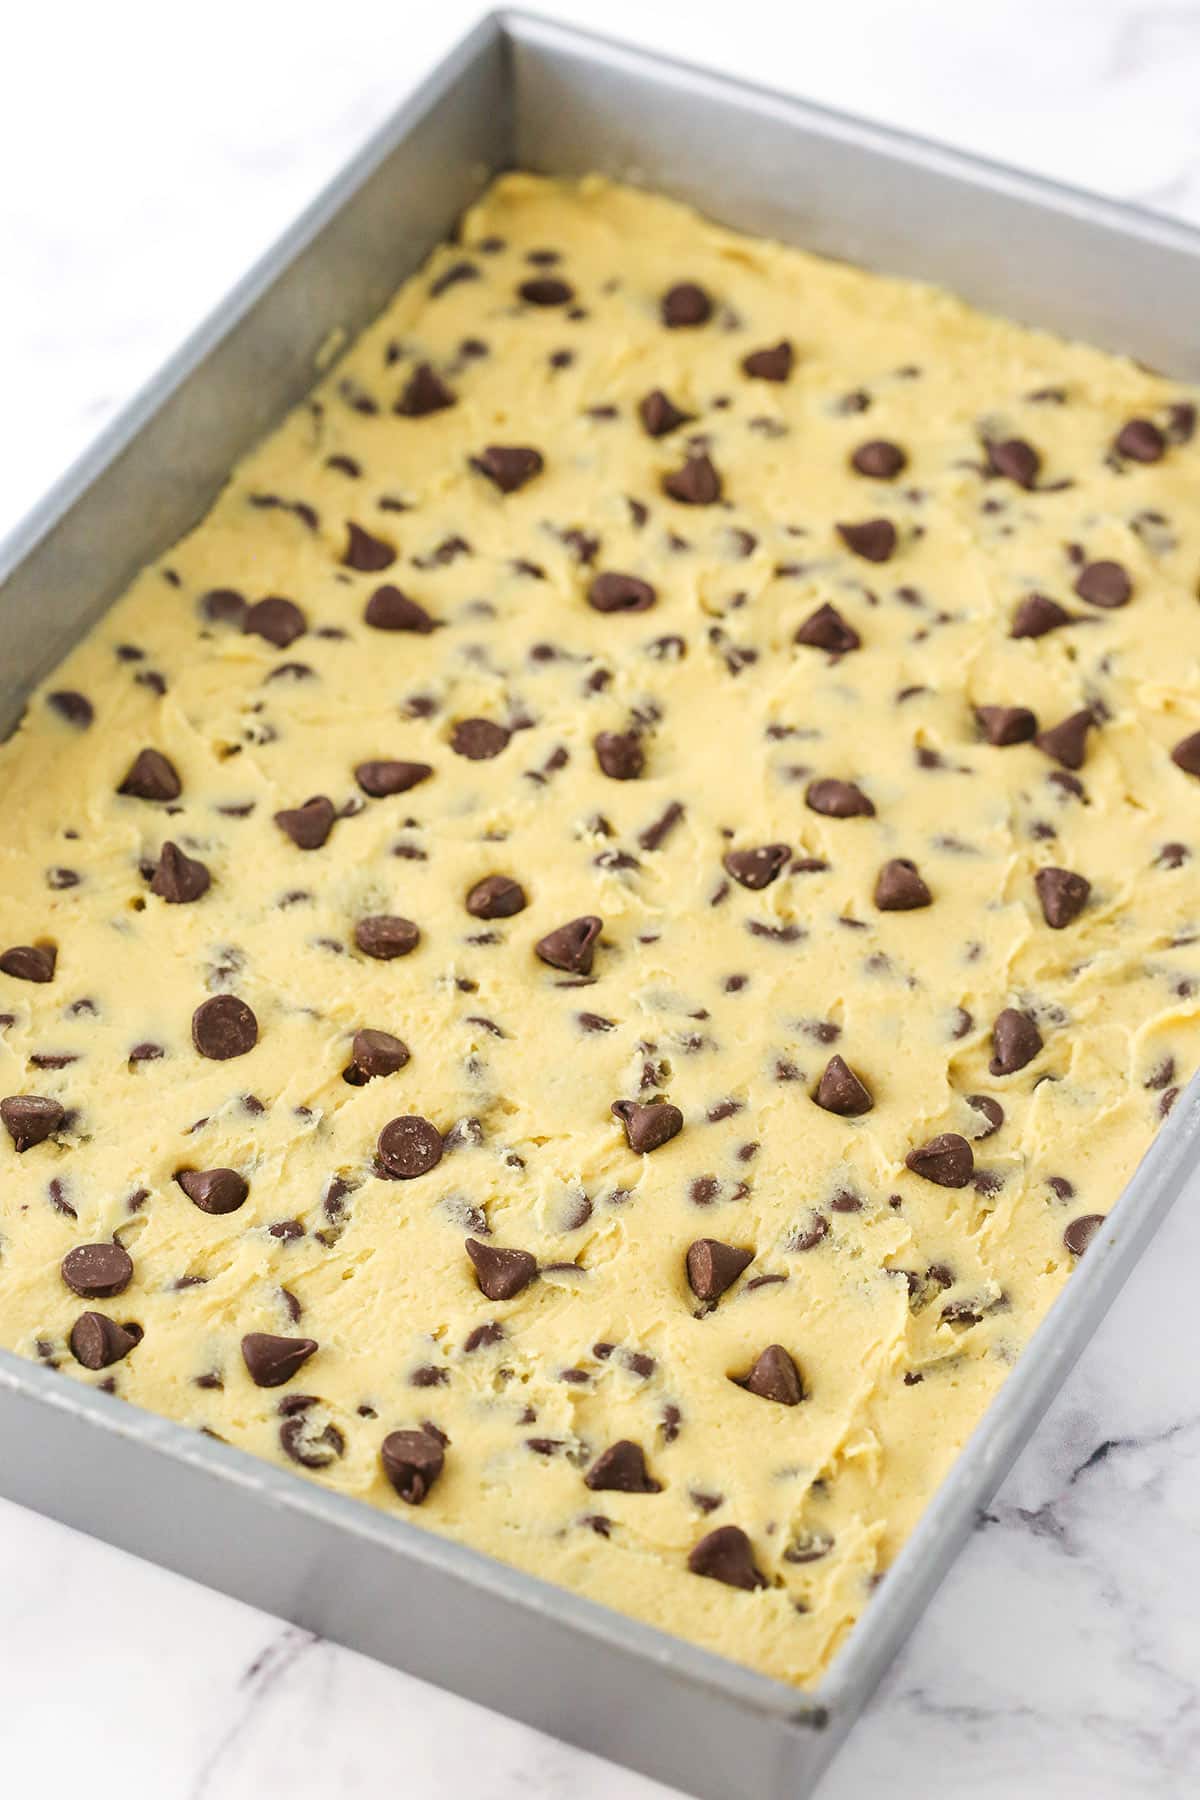 Chocolate chip cookie dough spread into a silver sheet pan